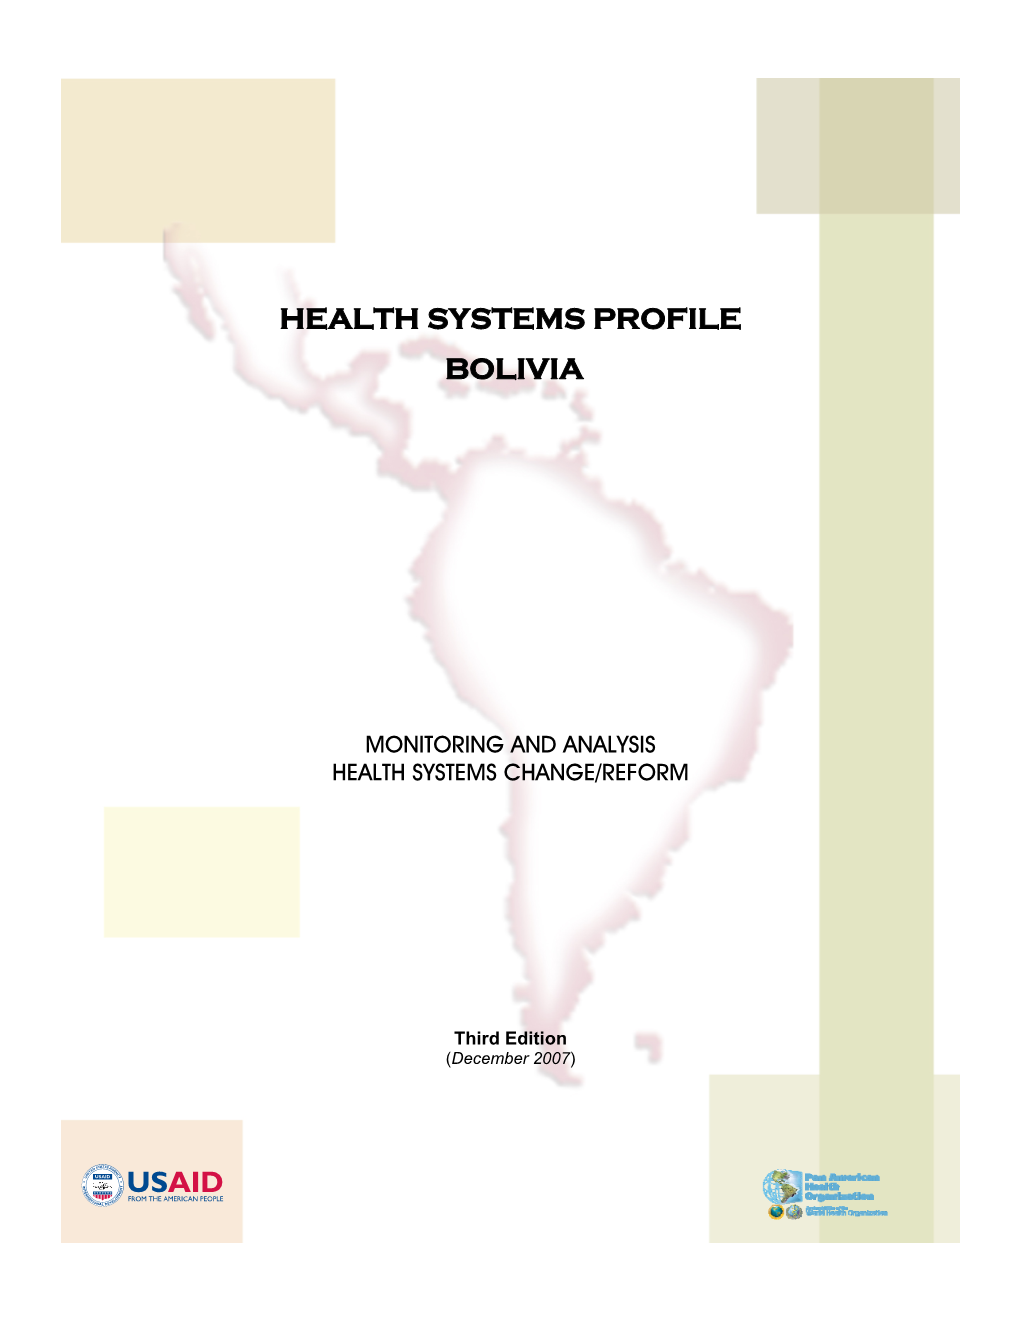 Health System Profile of Bolivia Was Prepared with the Support of Dr